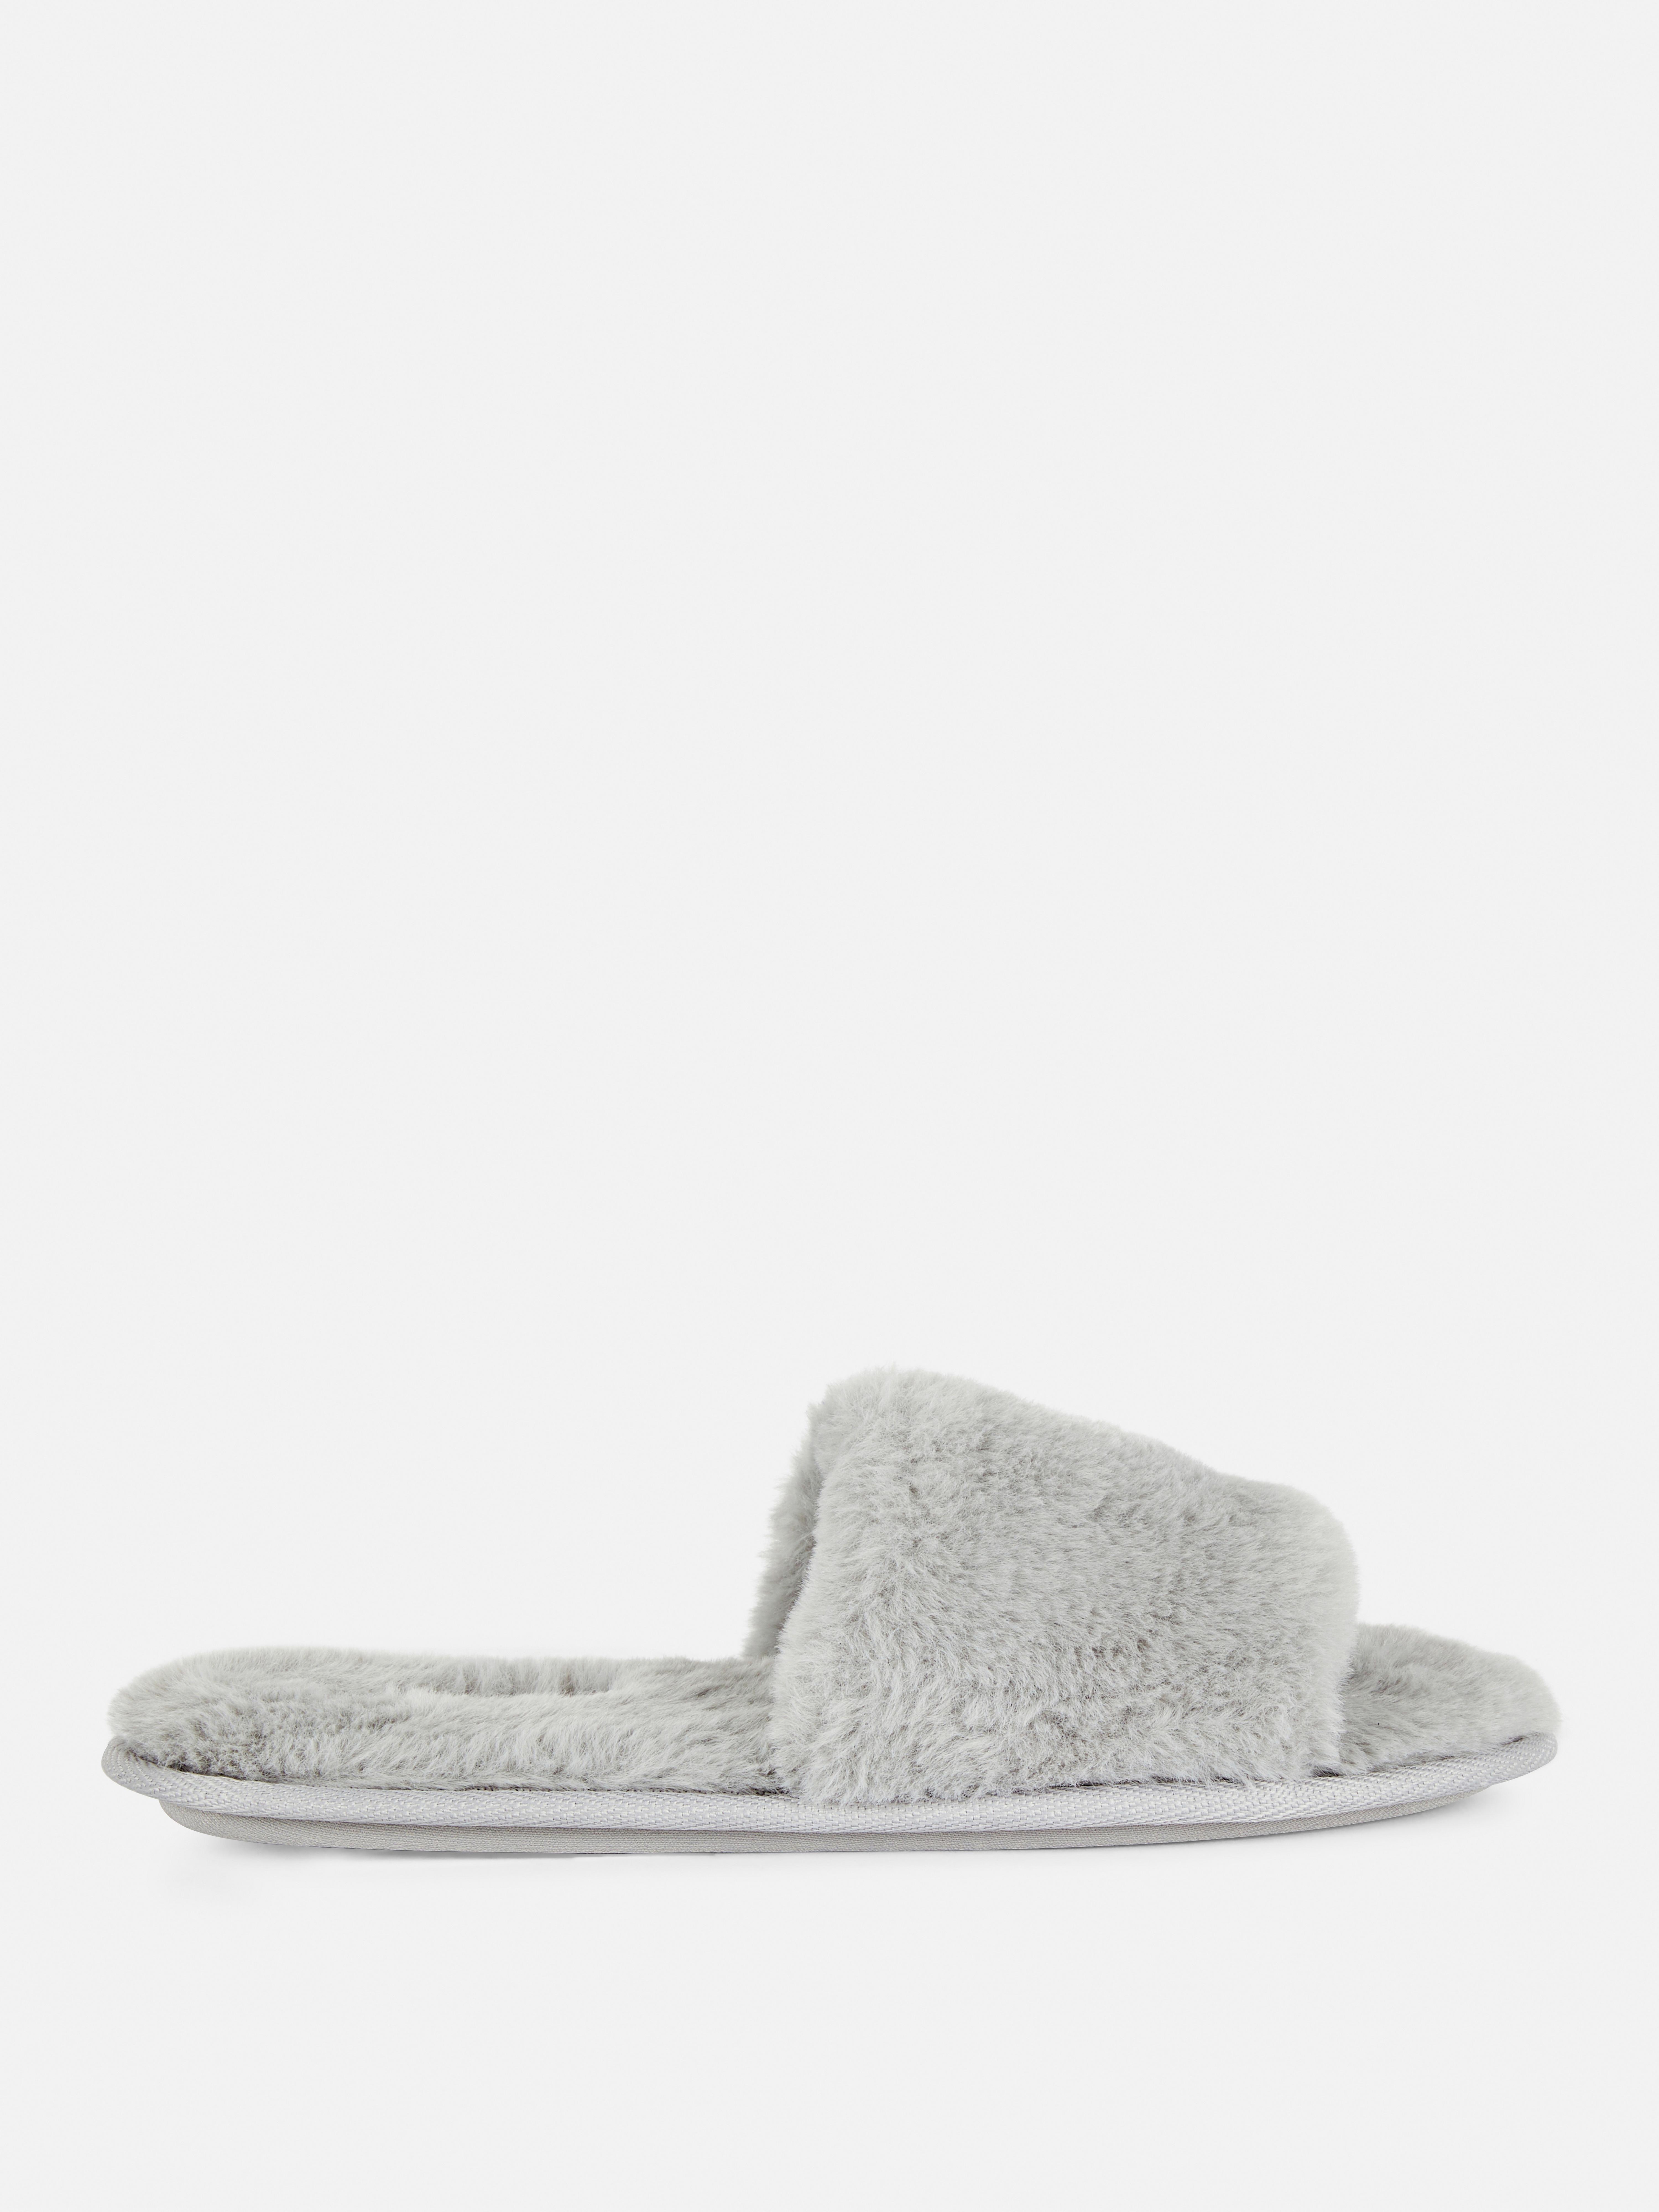 Faux Fur Slippers | Women's Slippers | Women's Shoes & Boots | Our ...